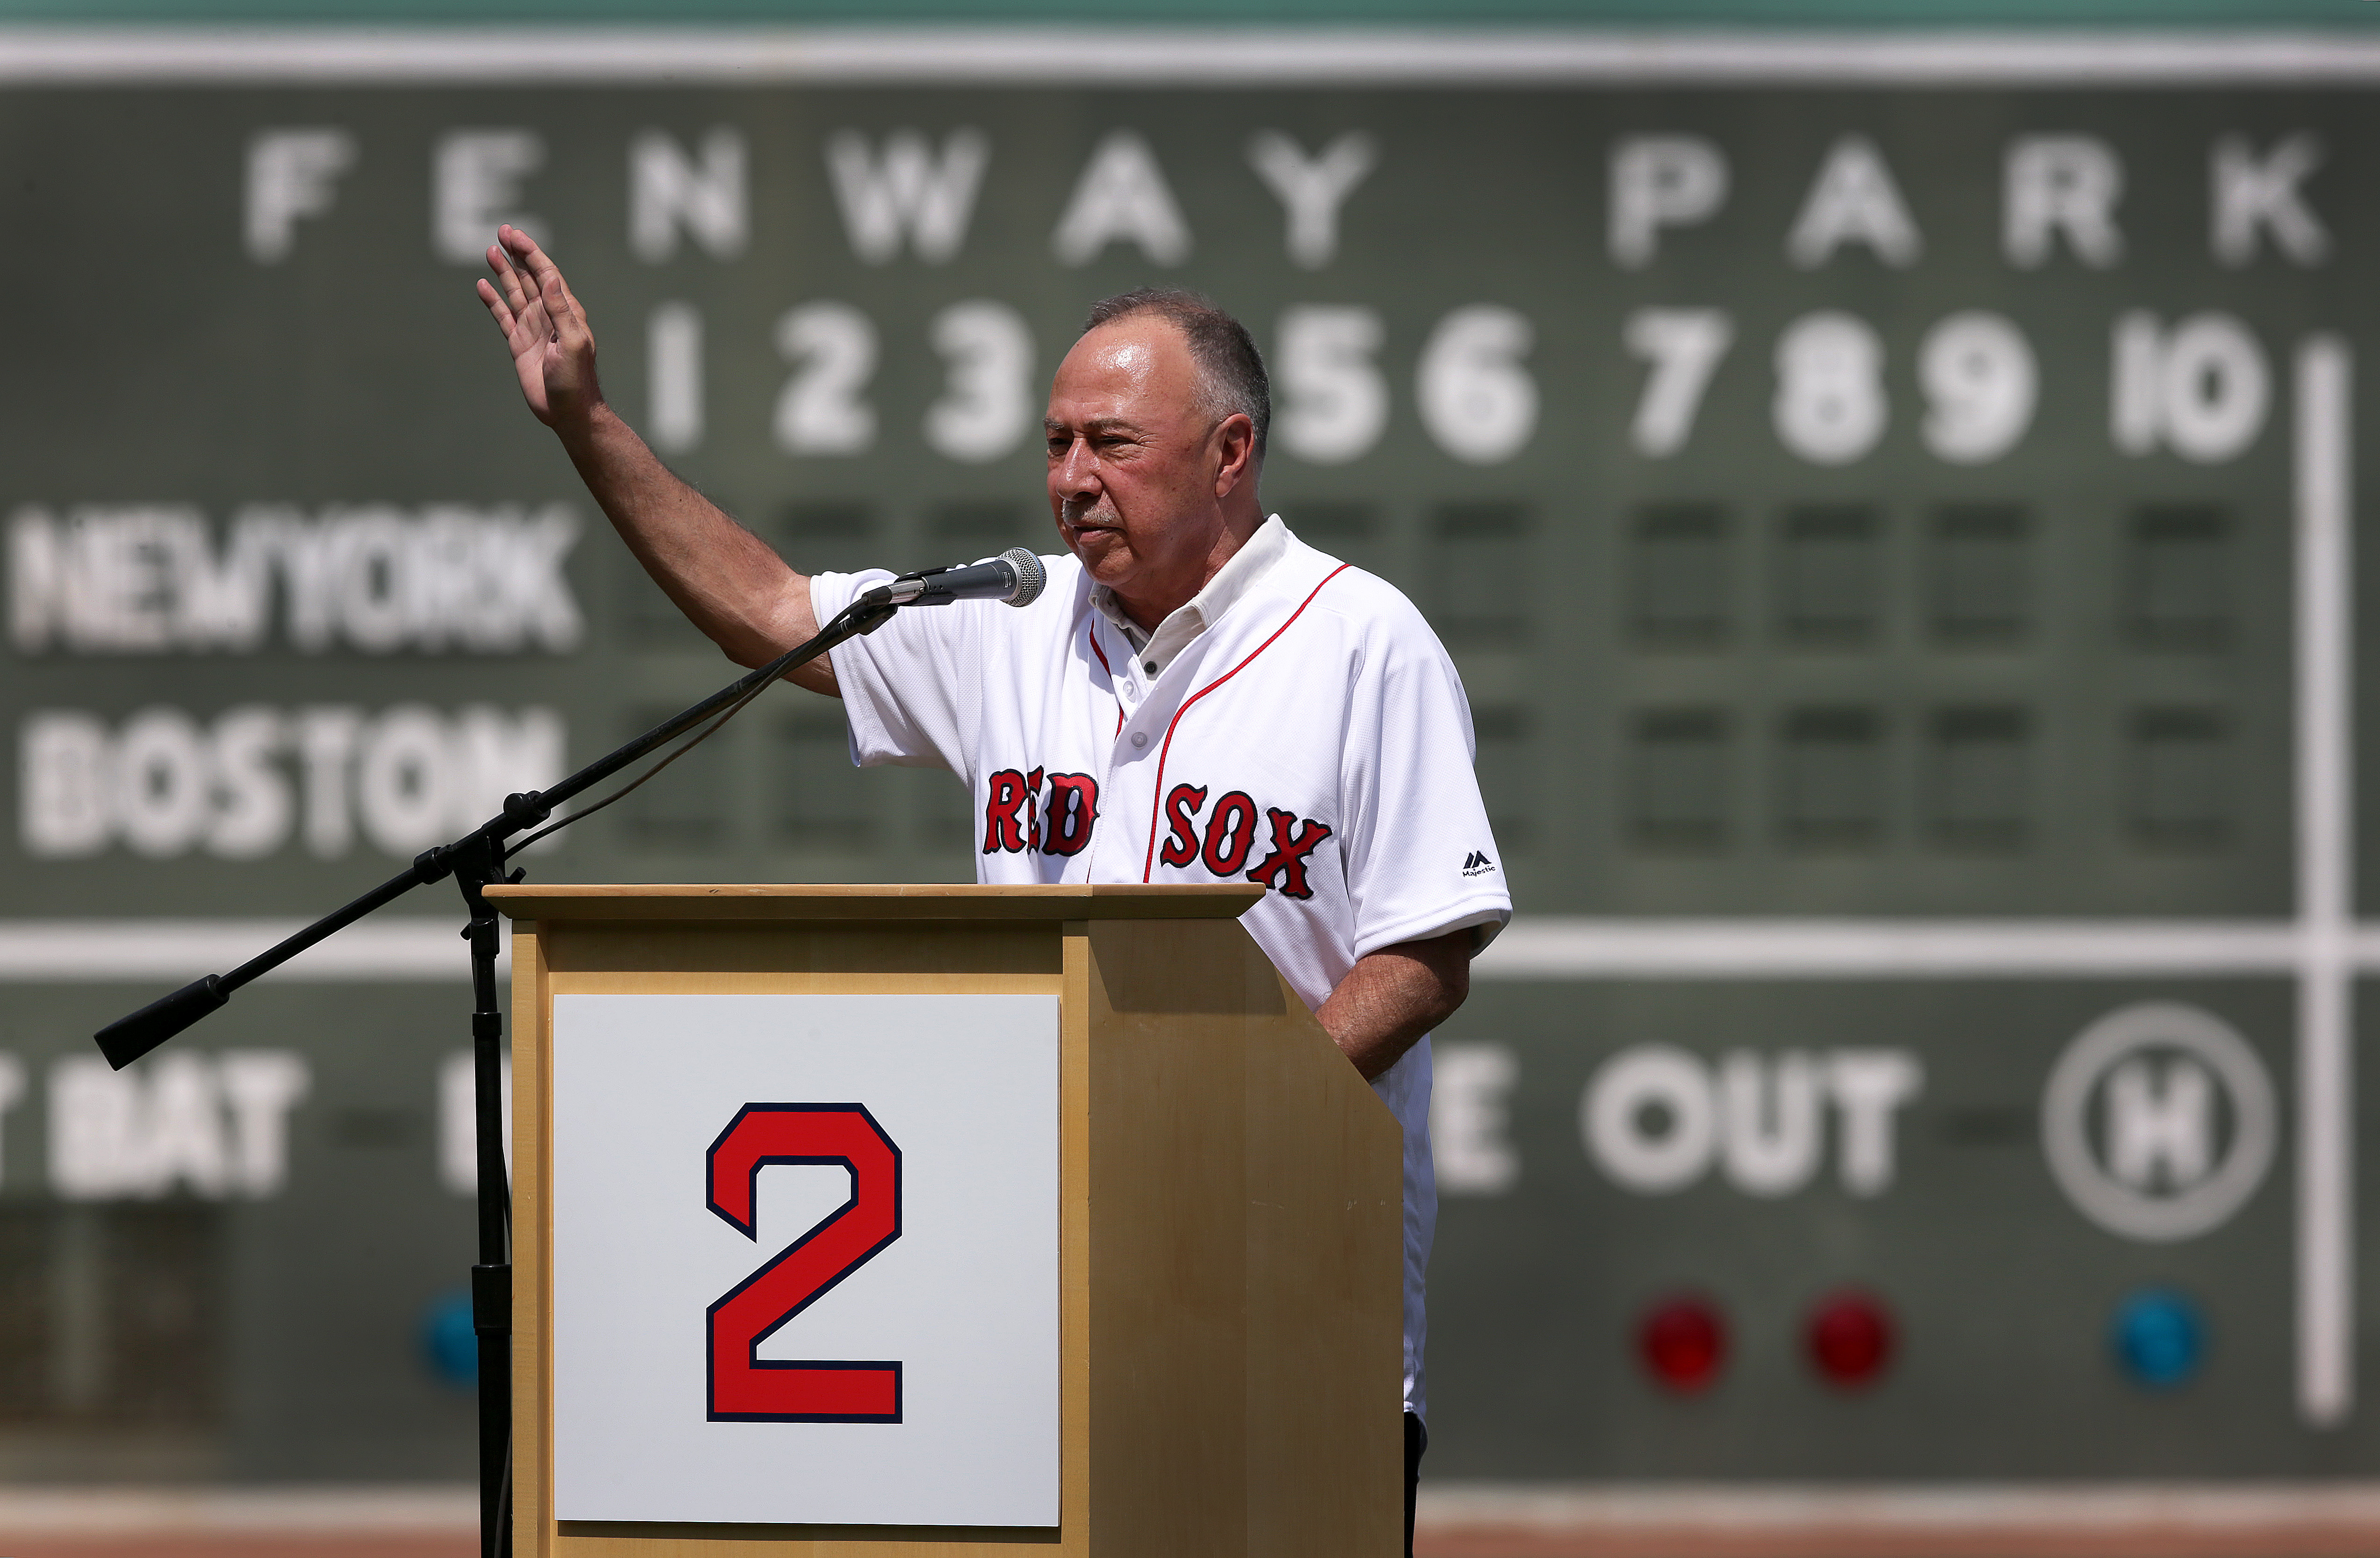 Services to honor Red Sox icon Jerry Remy are set for Thursday